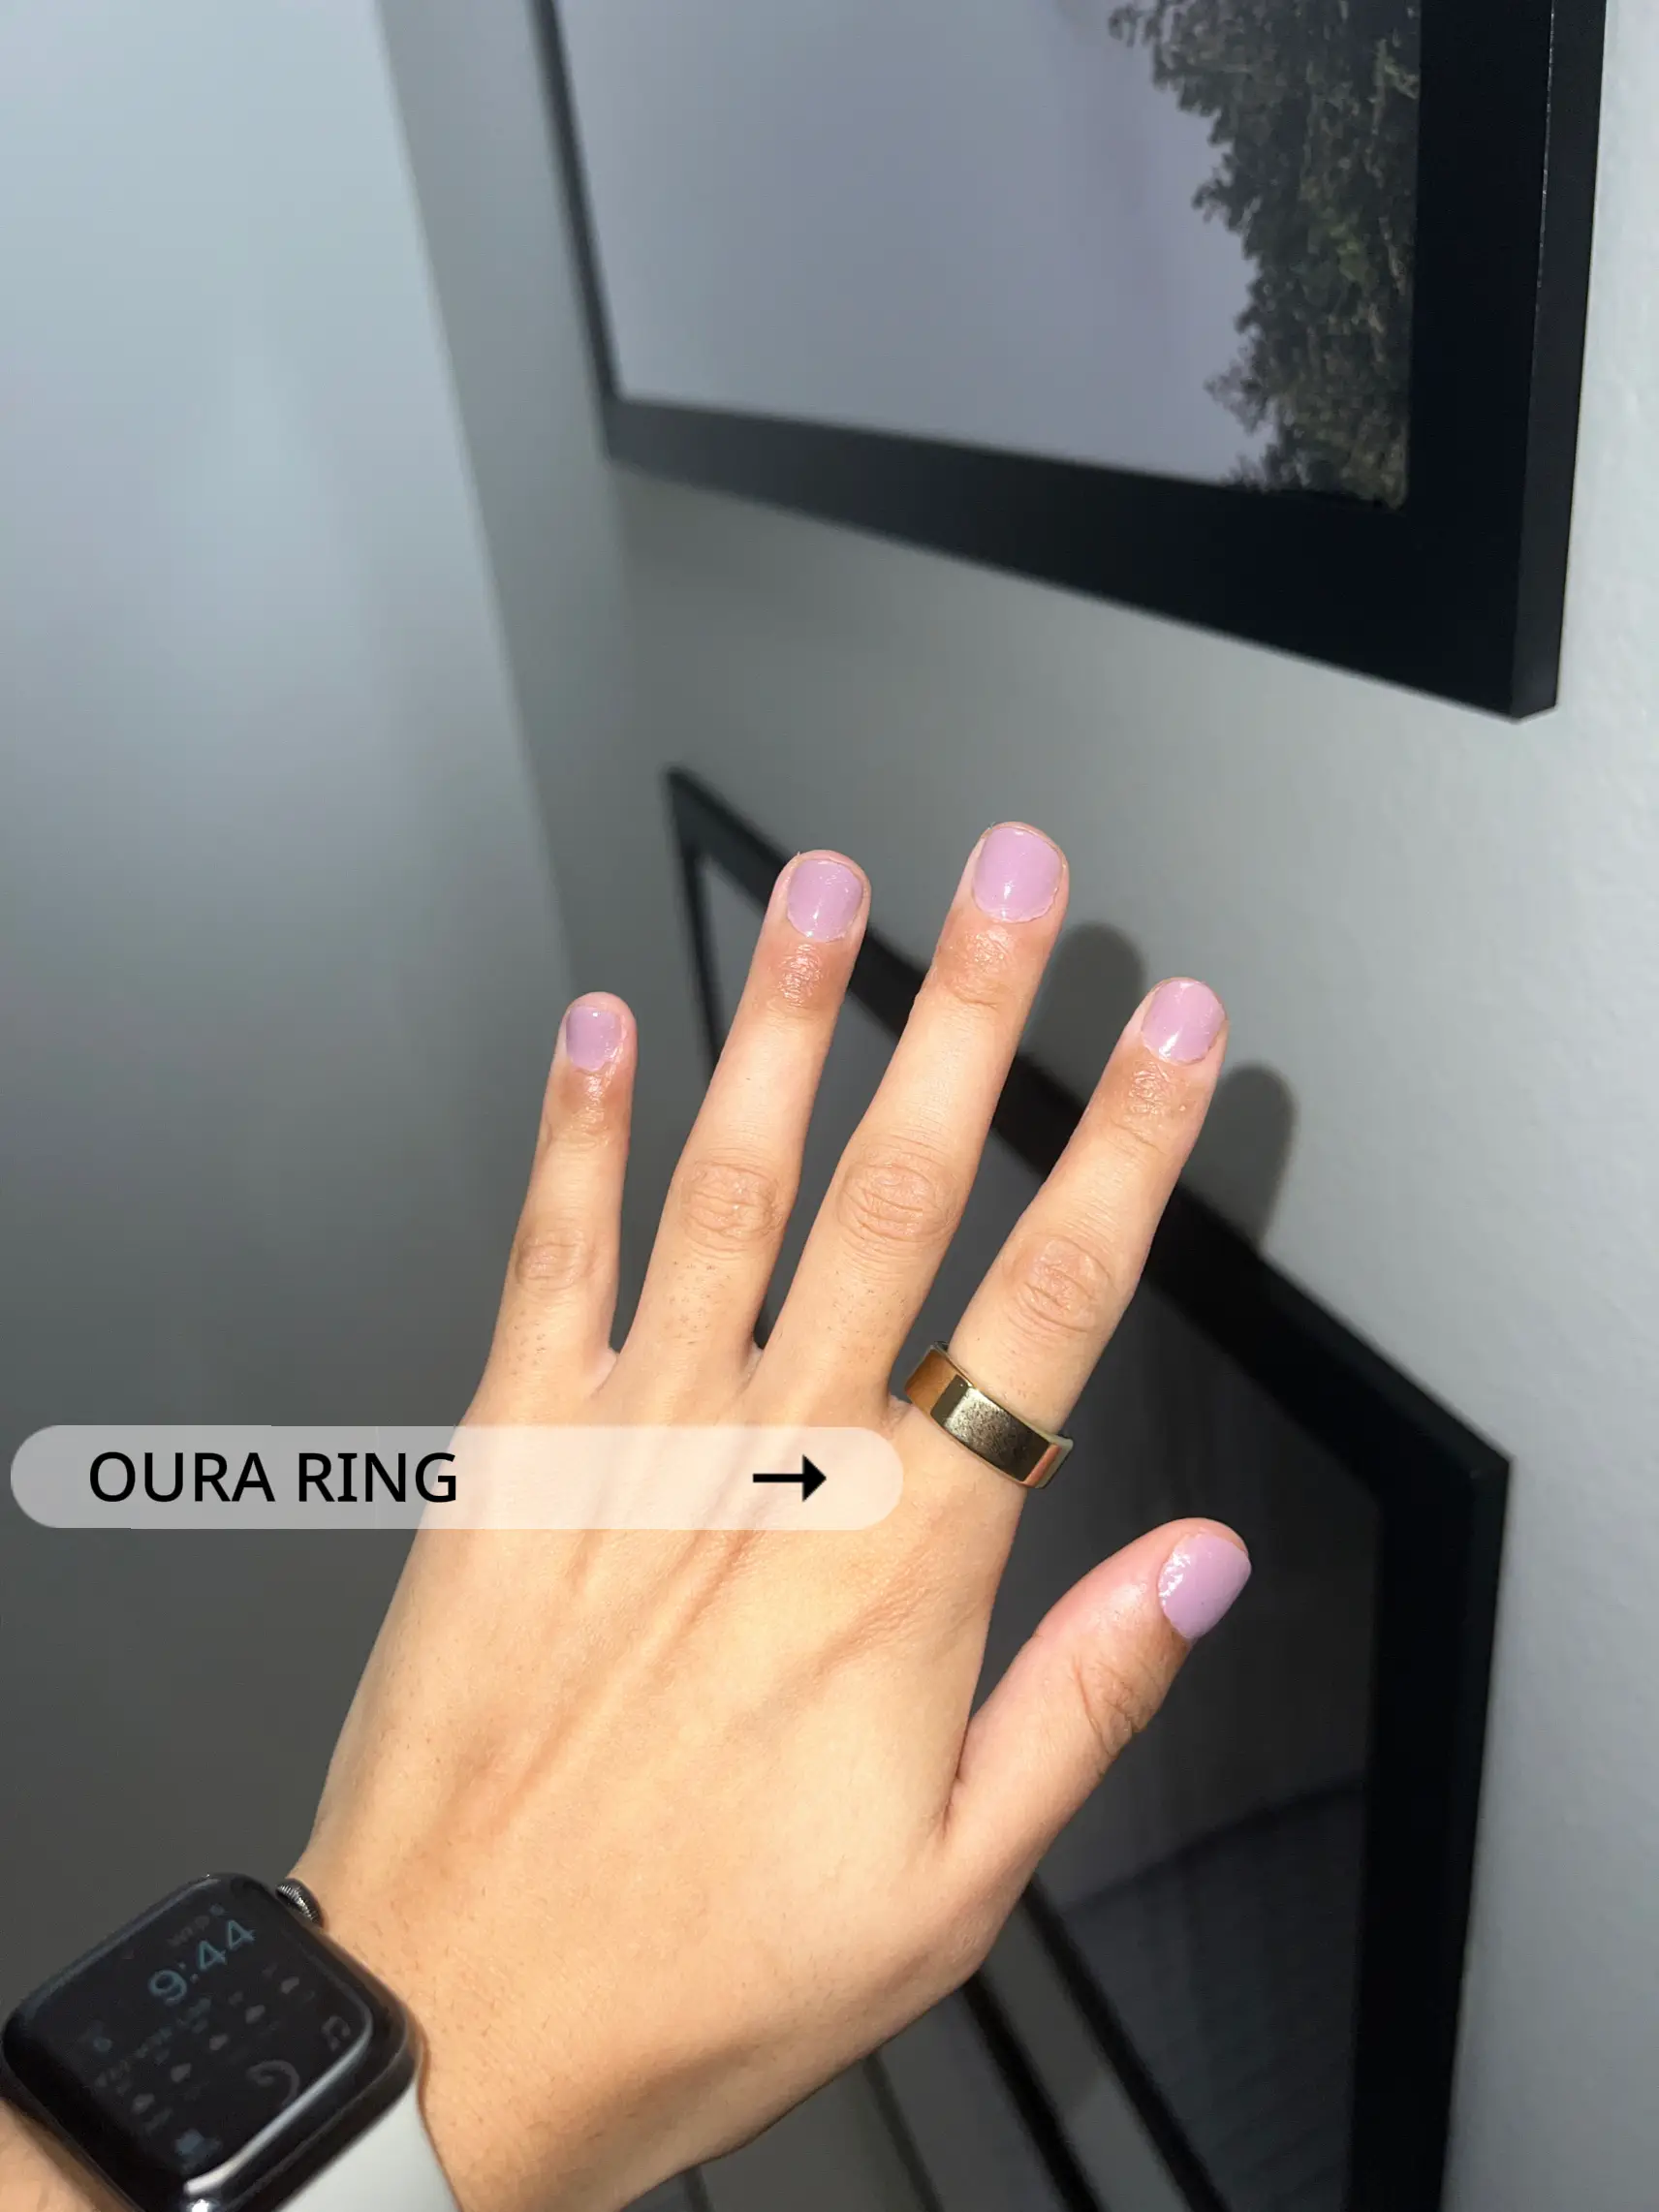 Nothing can stop the Oura Ring